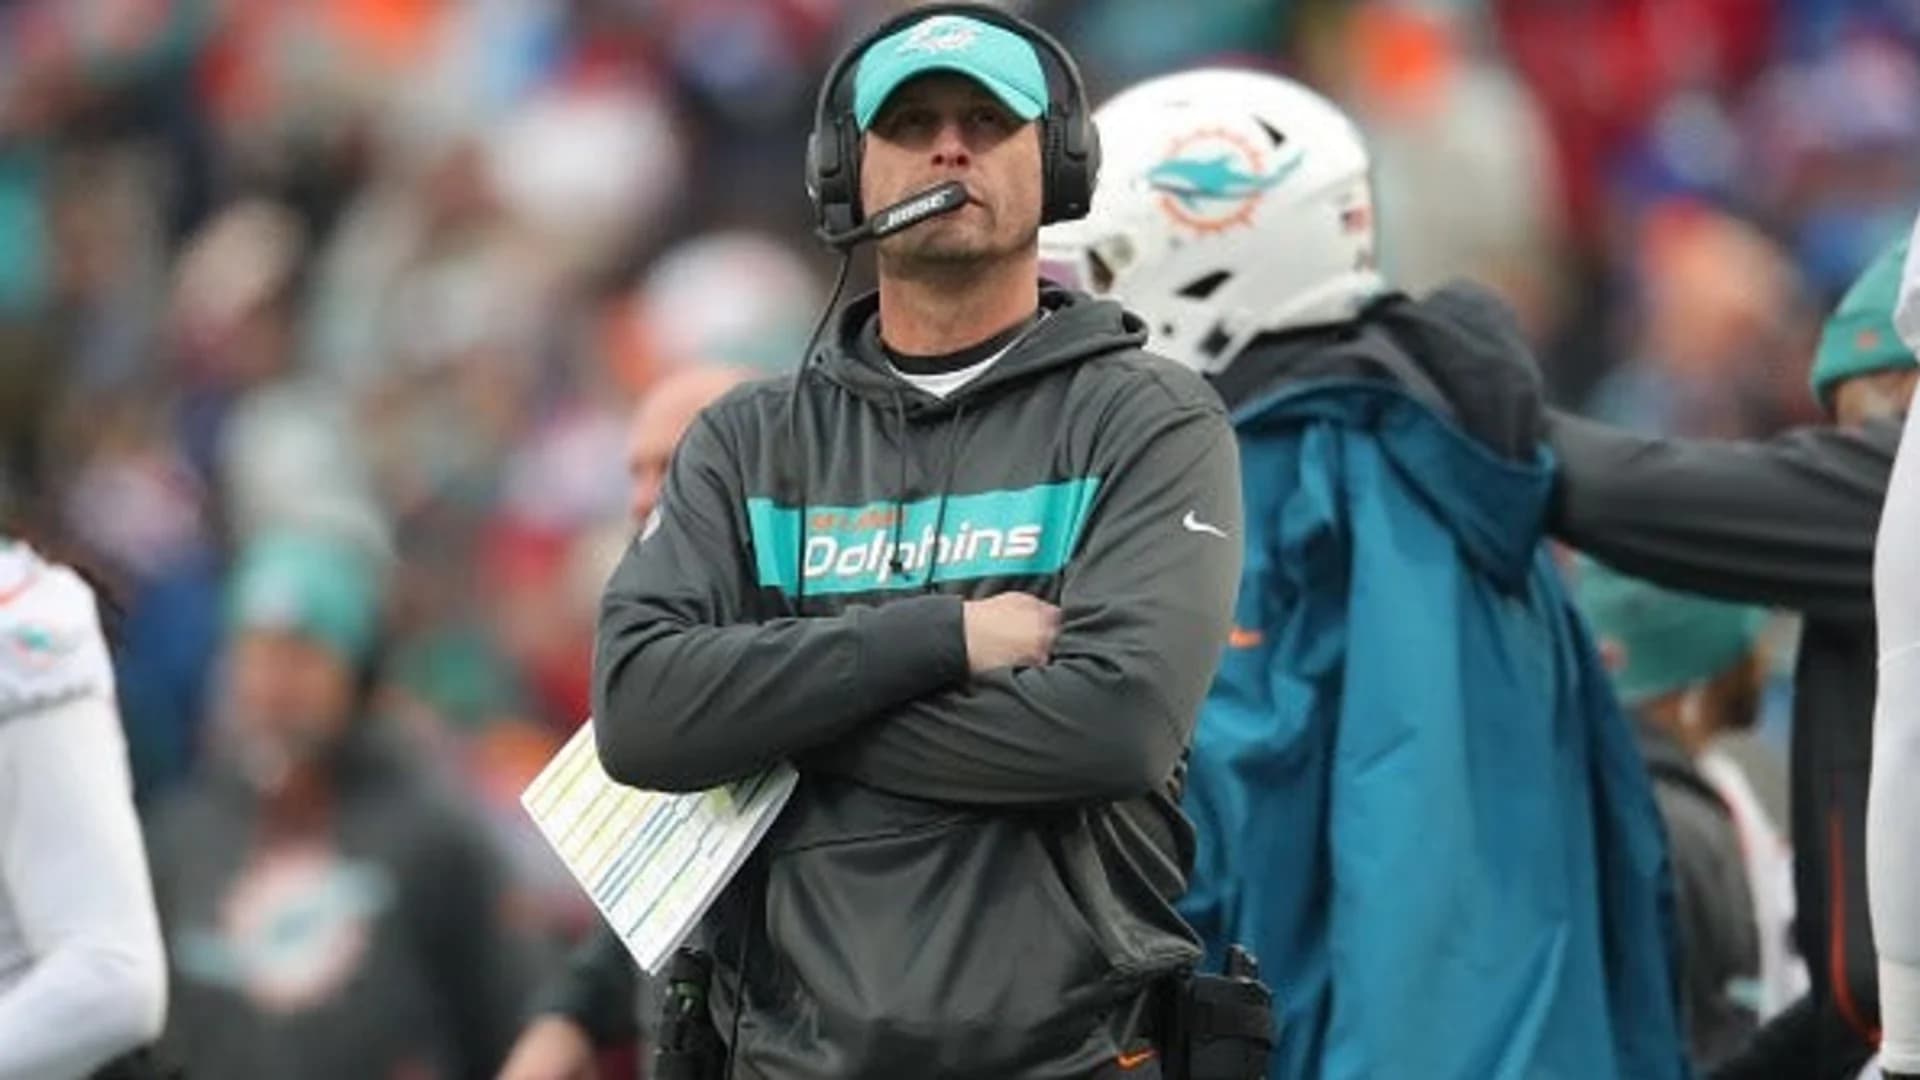 AP source: Jets hire former Dolphins coach Adam Gase